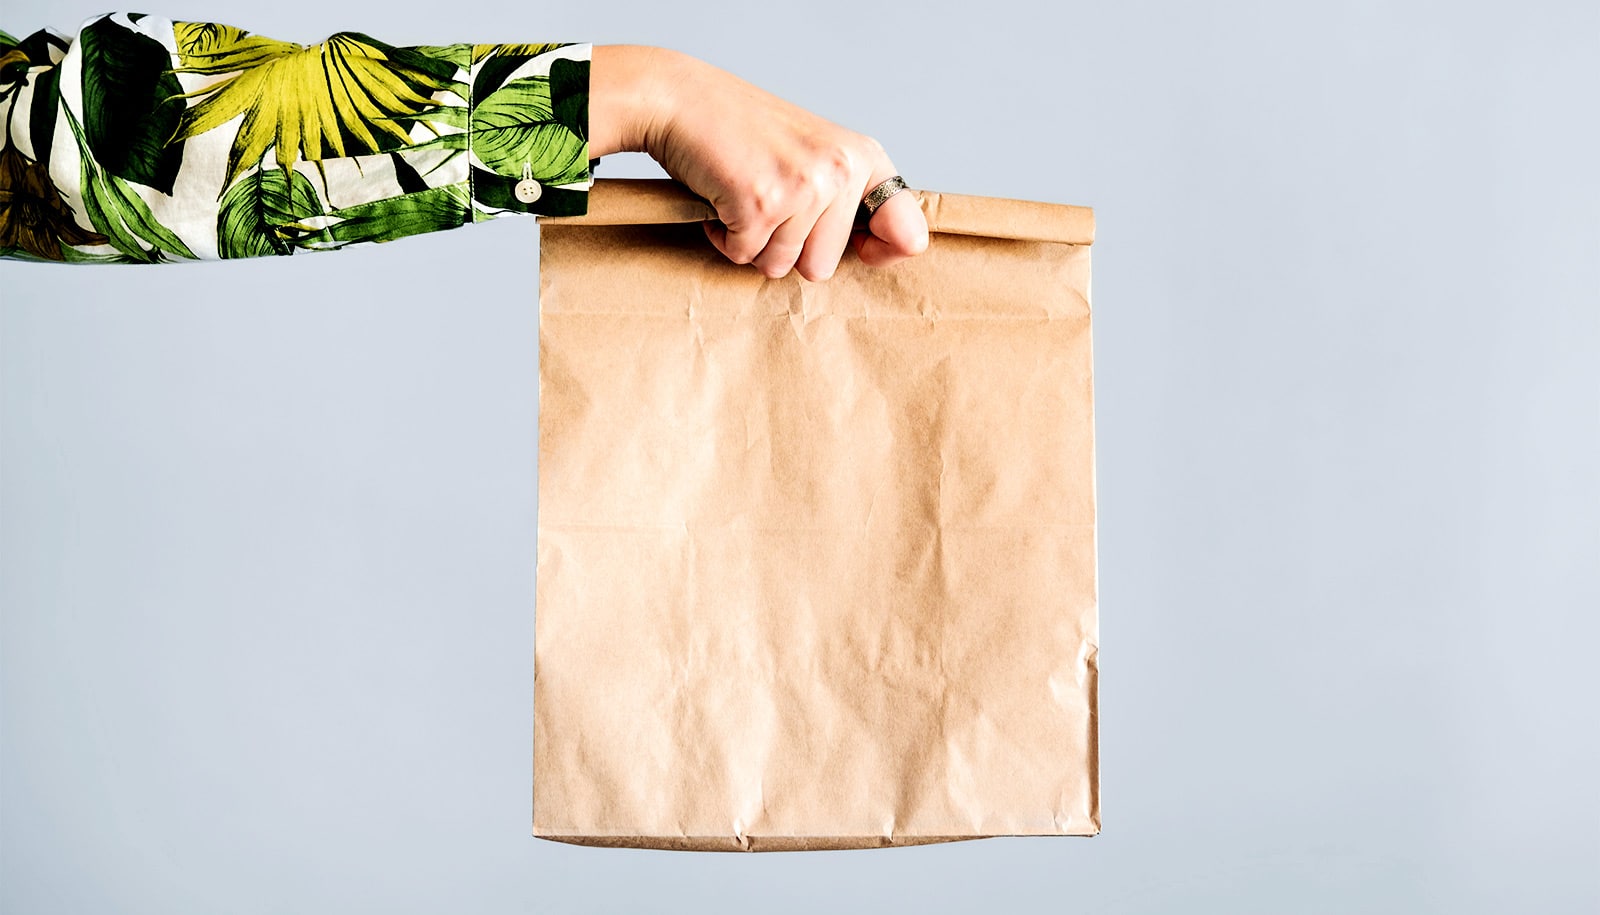 This cheap, strong paper bag can be reused, then turned into biofuel